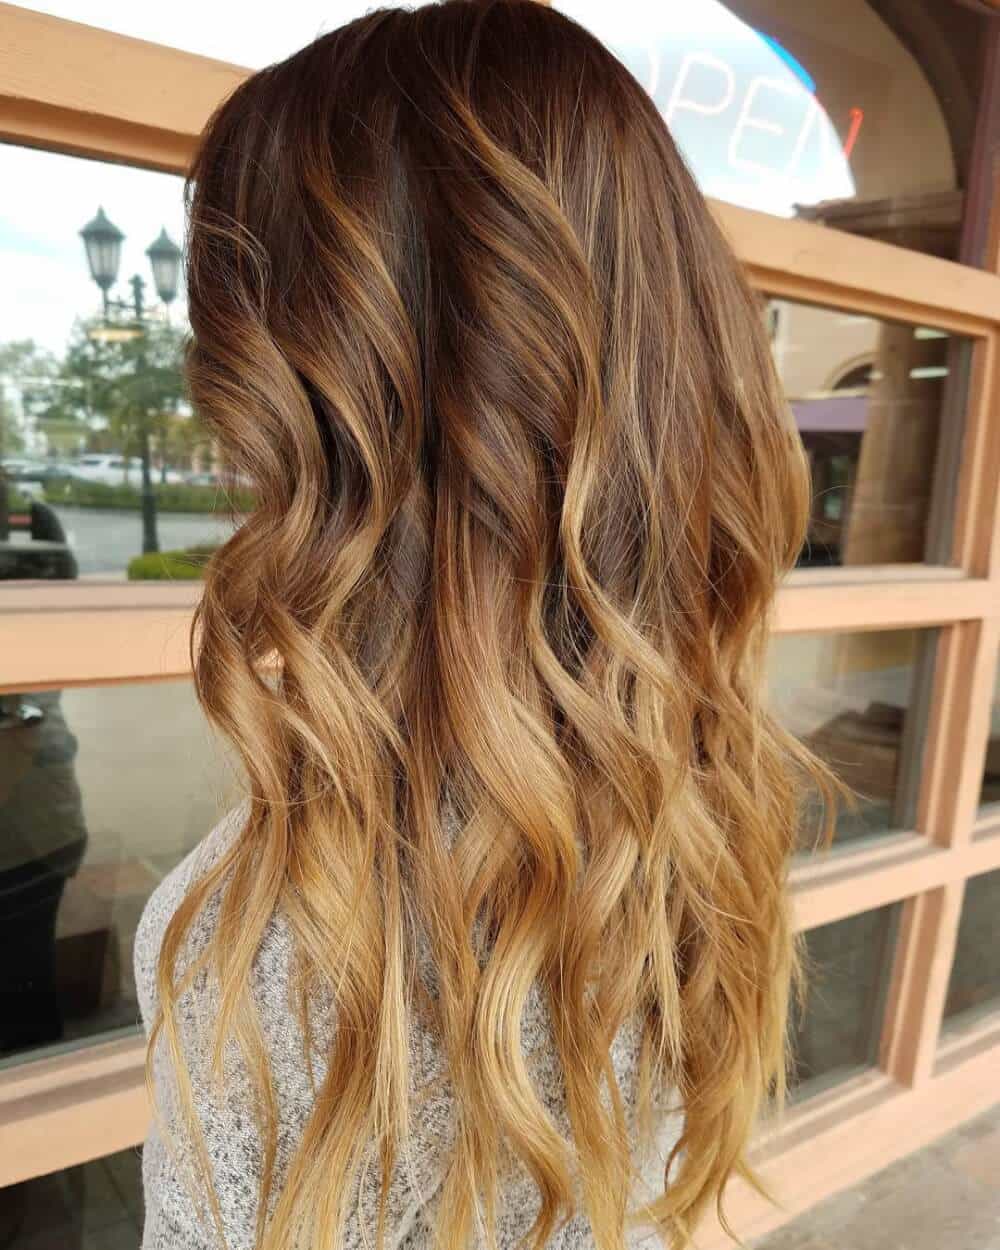 15 Mesmerizing Warm Brown Hair Color Ideas for 2021